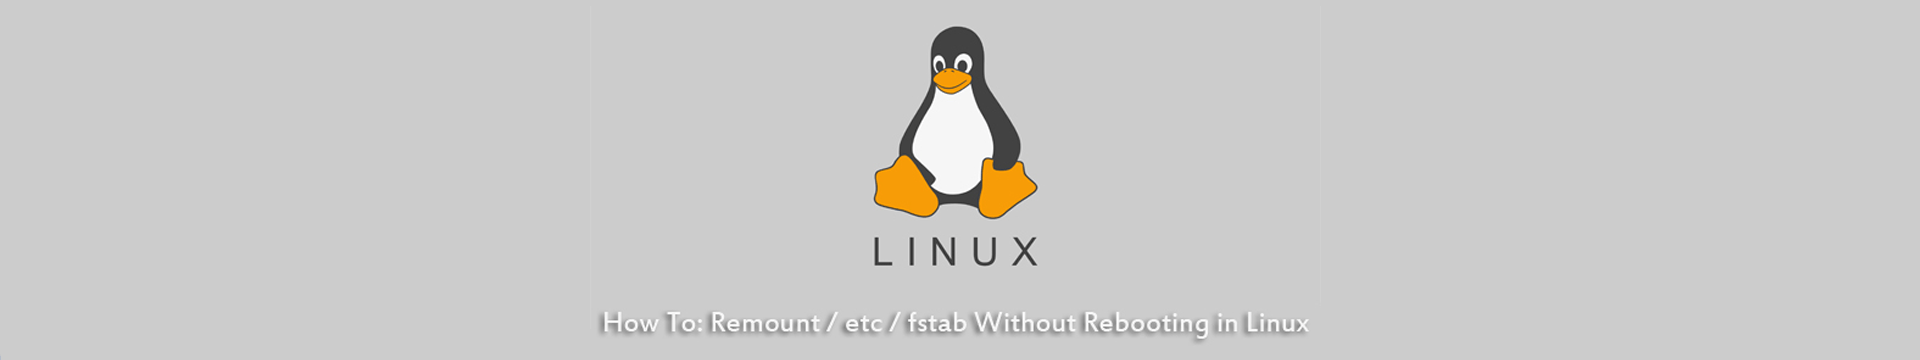 How To: Remount /etc/fstab Without Rebooting in Linux